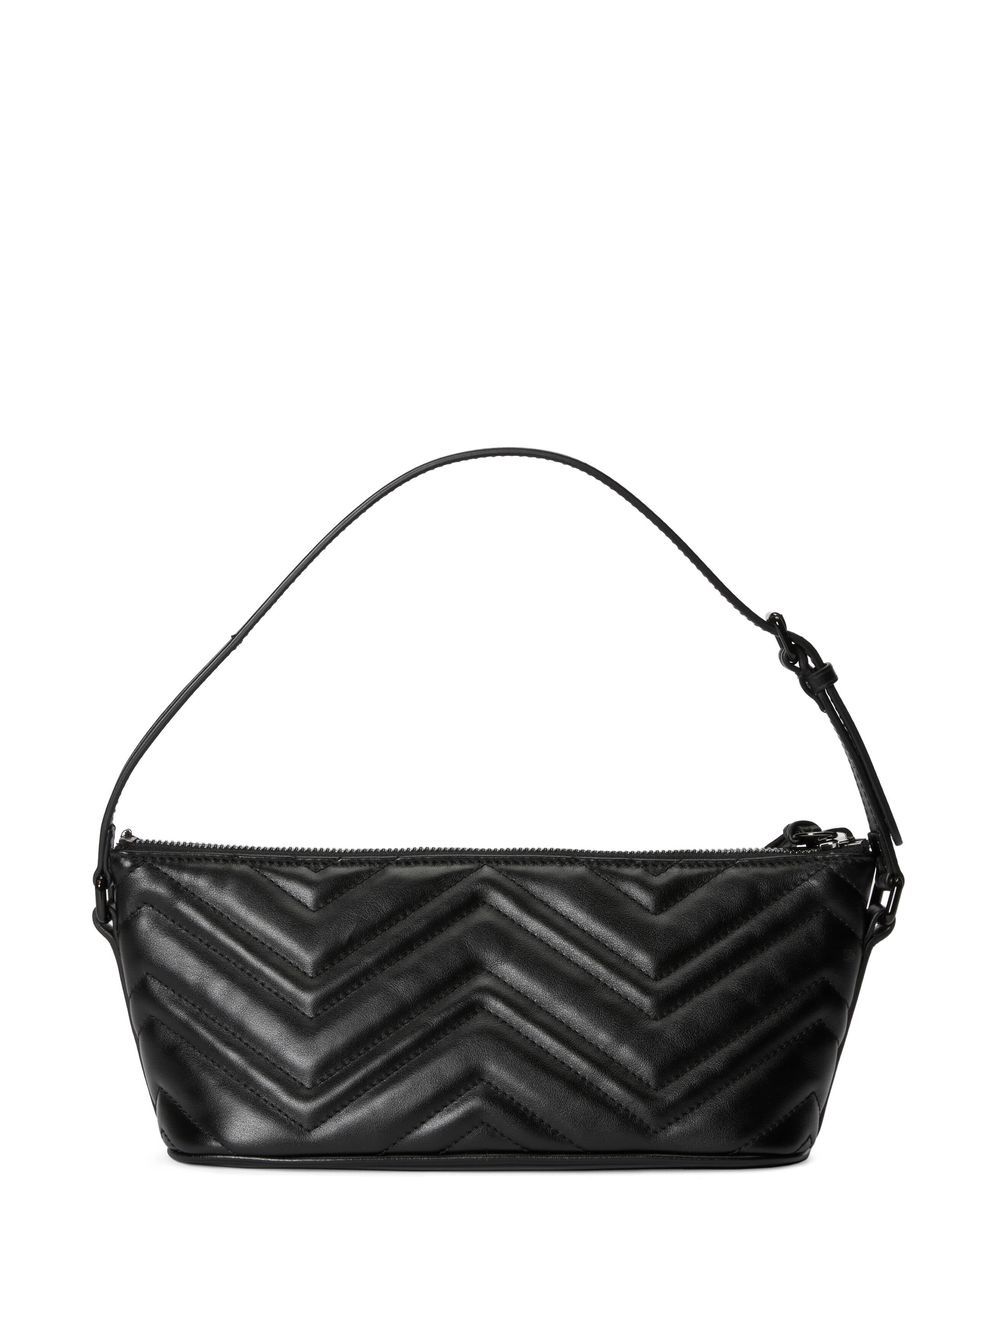 Gucci Gg Marmont Leather Shoulder Bag In Black | ModeSens